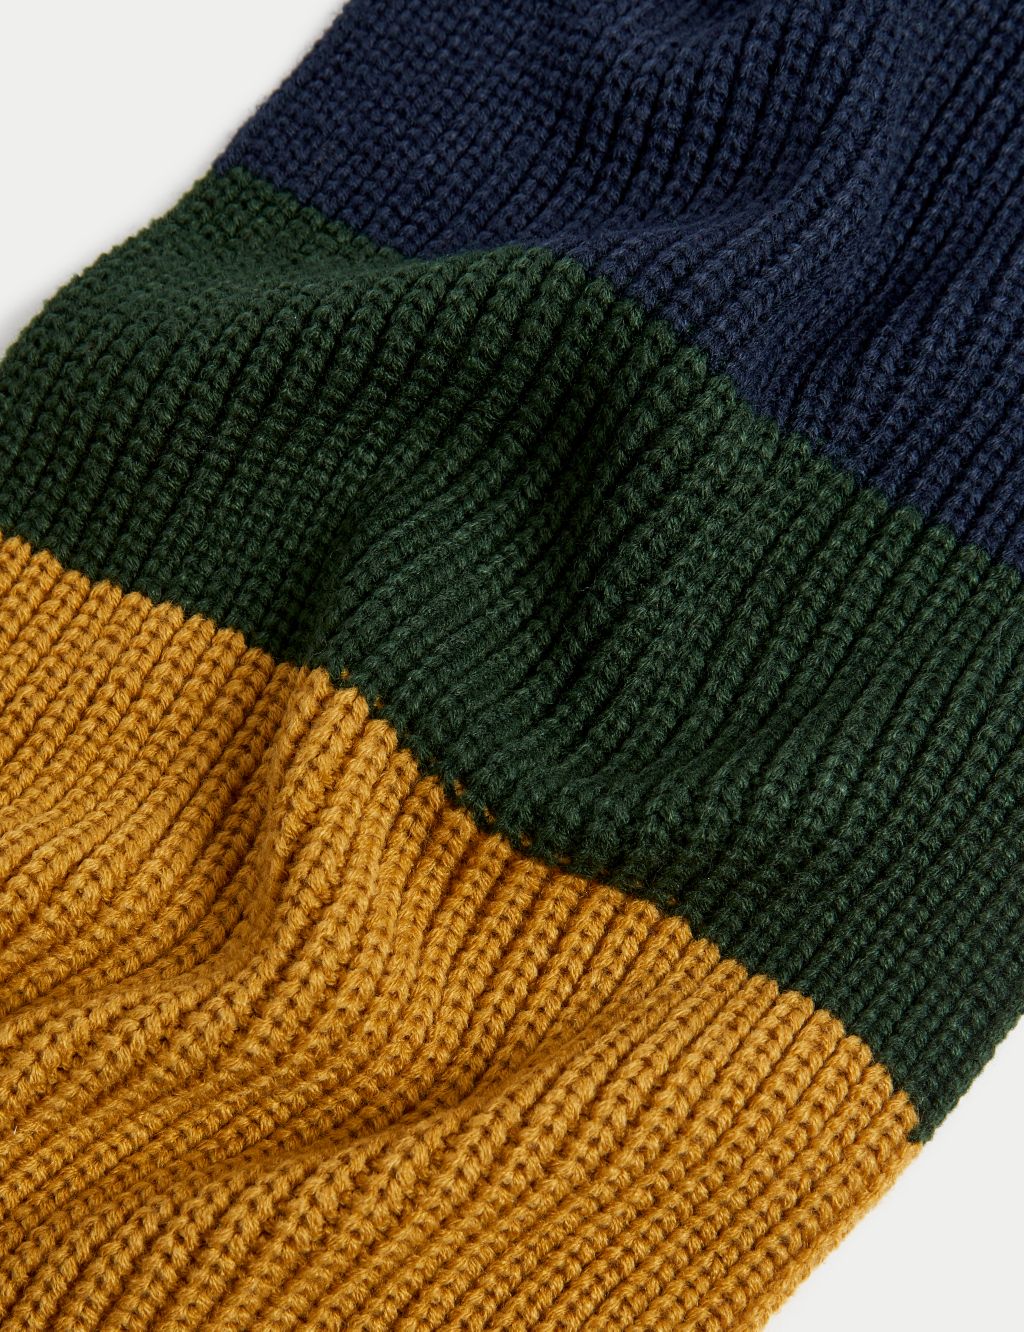 Colour Block Knitted Scarf image 2